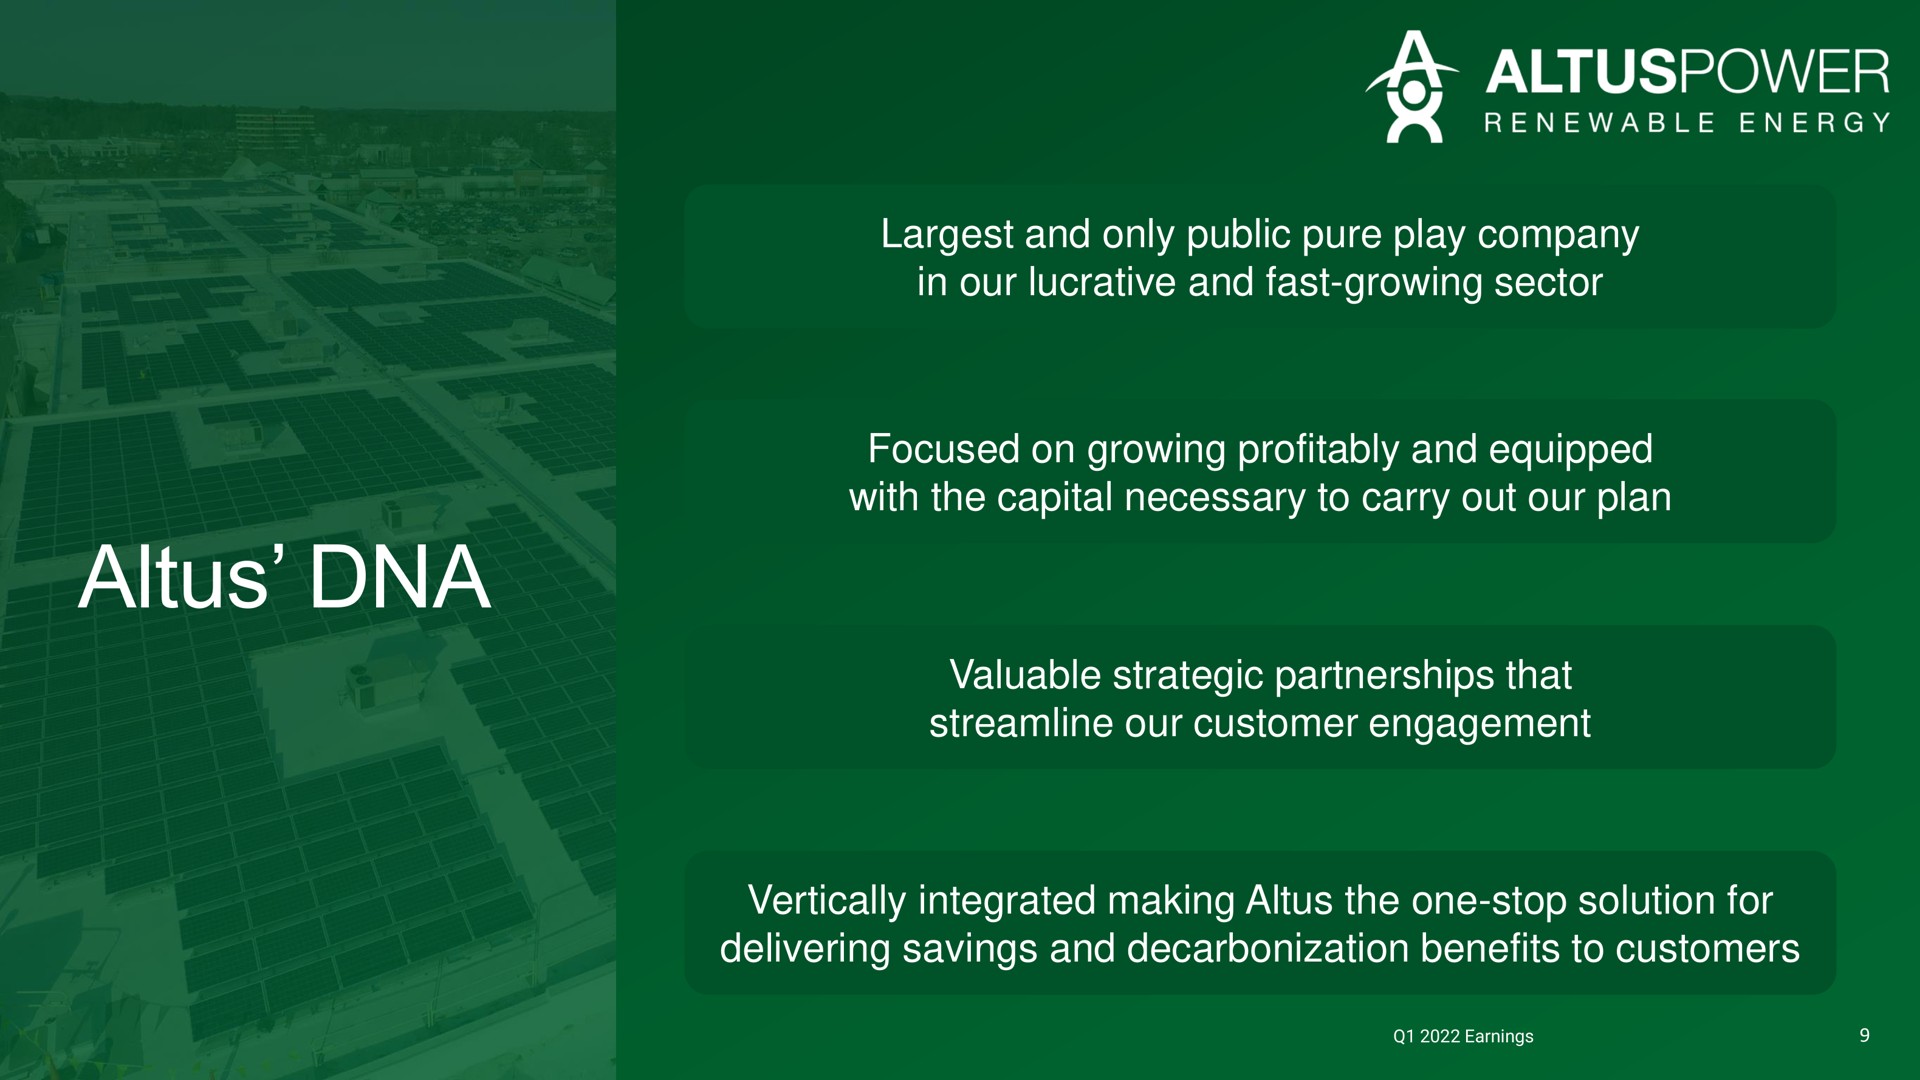 and only public pure play company in our lucrative and fast growing sector focused on growing profitably and equipped with the capital necessary to carry out our plan valuable strategic partnerships that streamline our customer engagement vertically integrated making the one stop solution for delivering savings and decarbonization benefits to customers | Altus Power